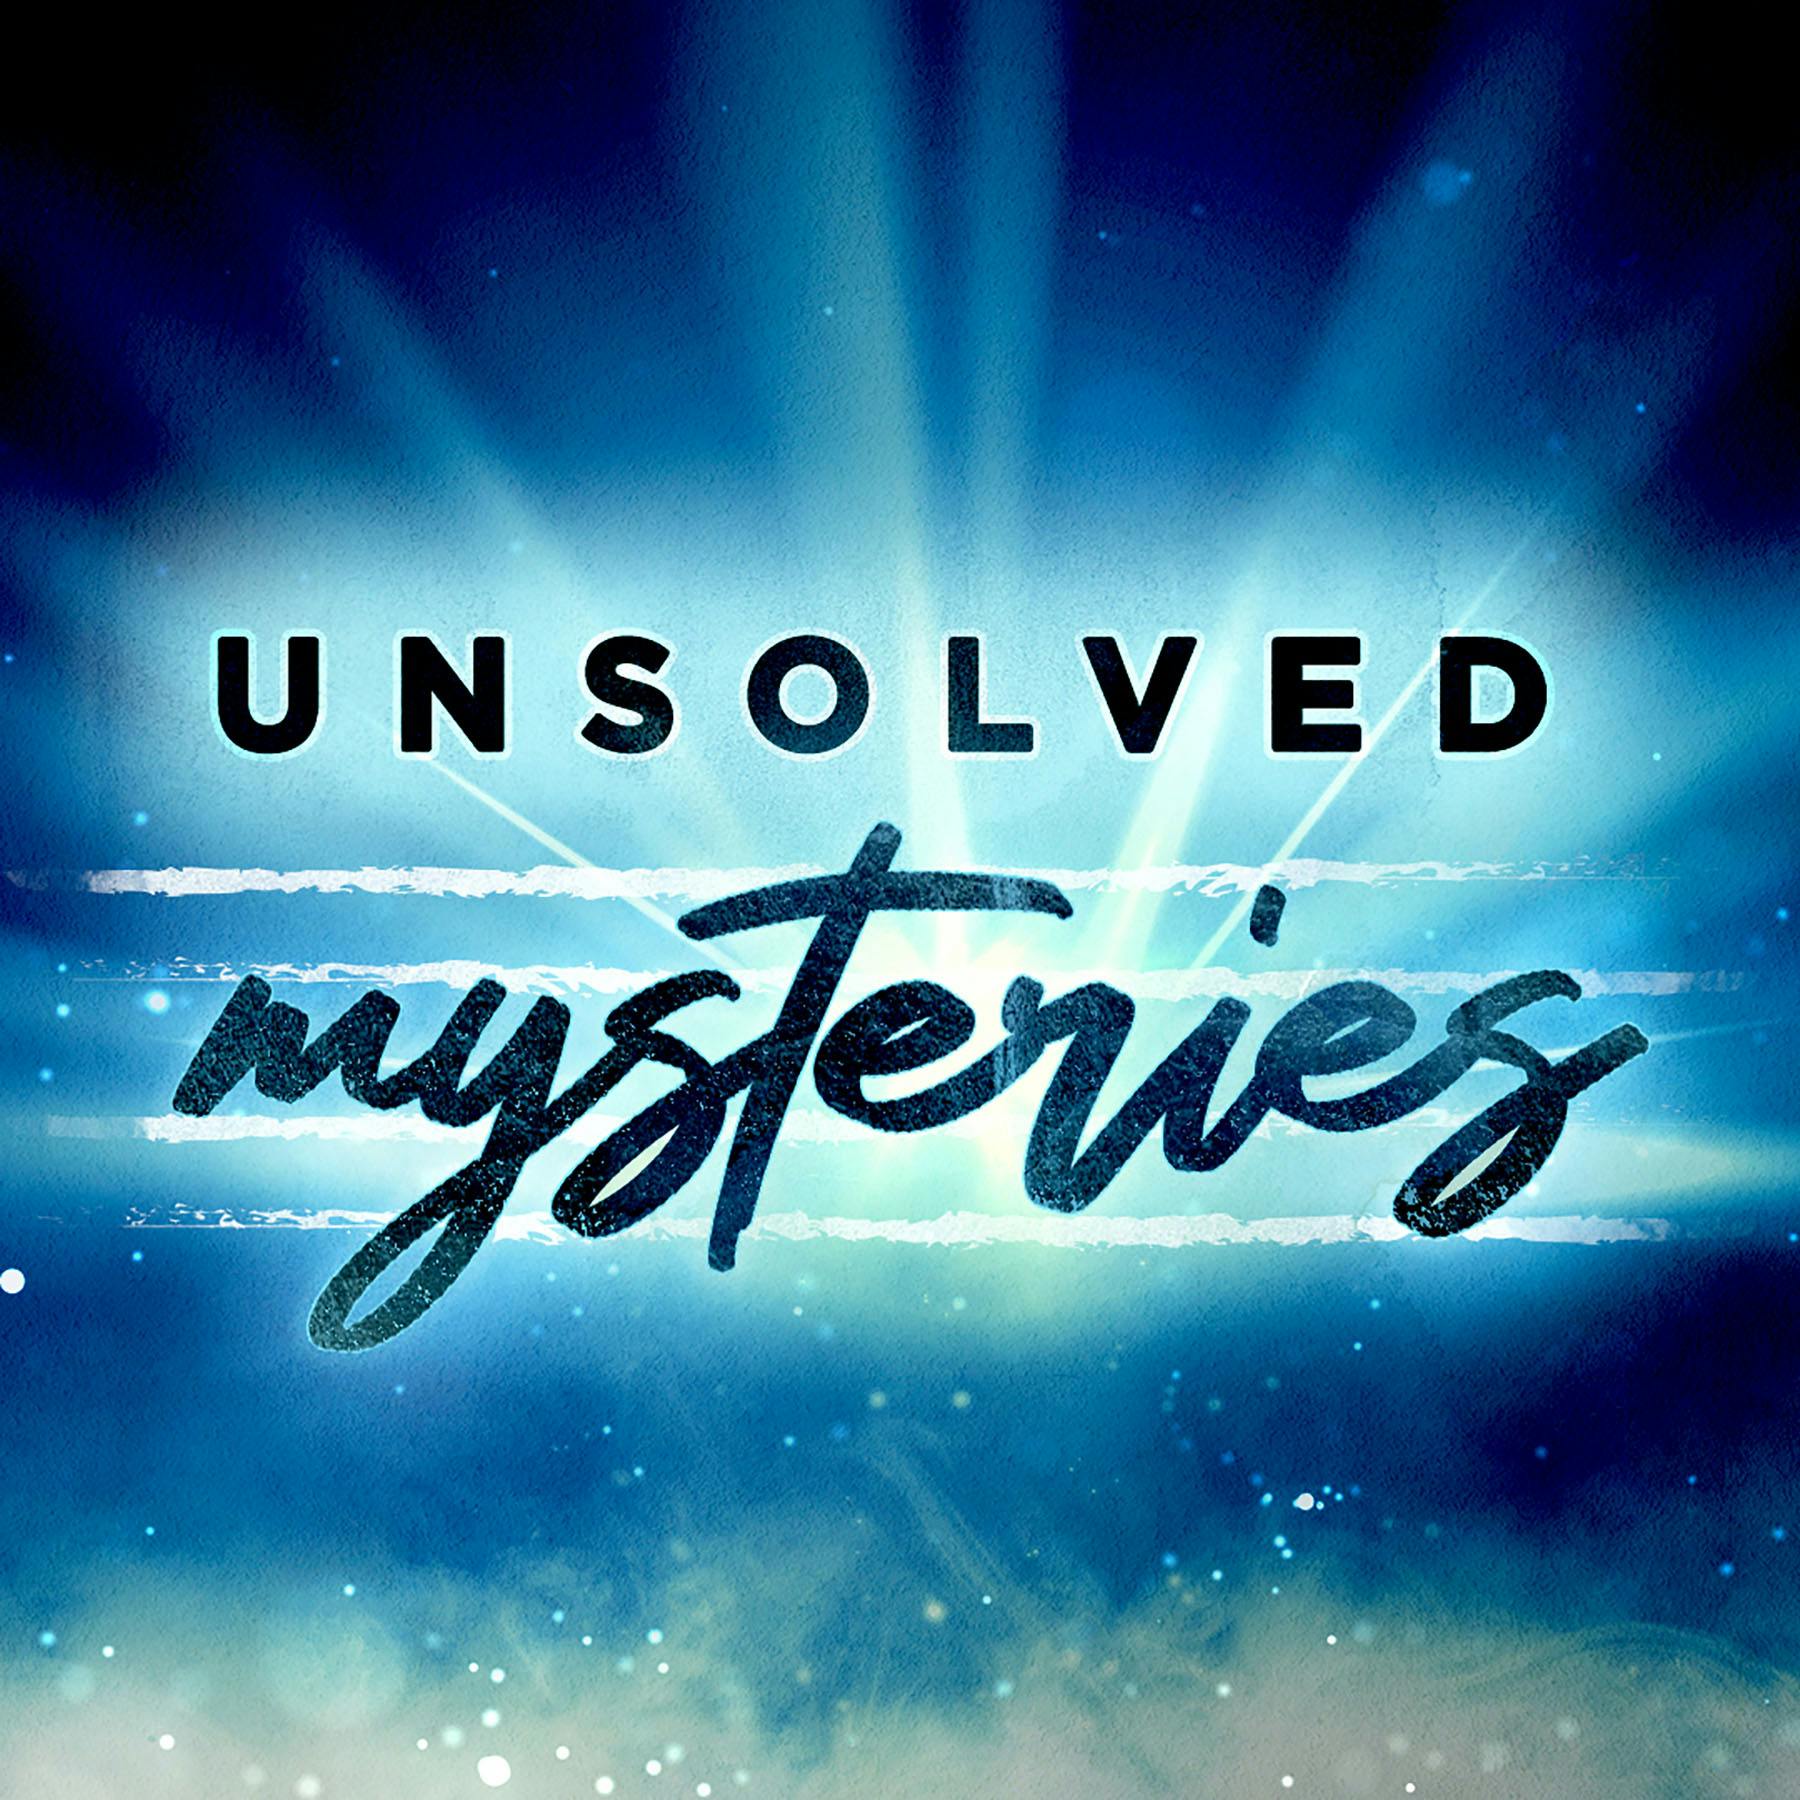 Welcome to Season 2 of Unsolved Mysteries